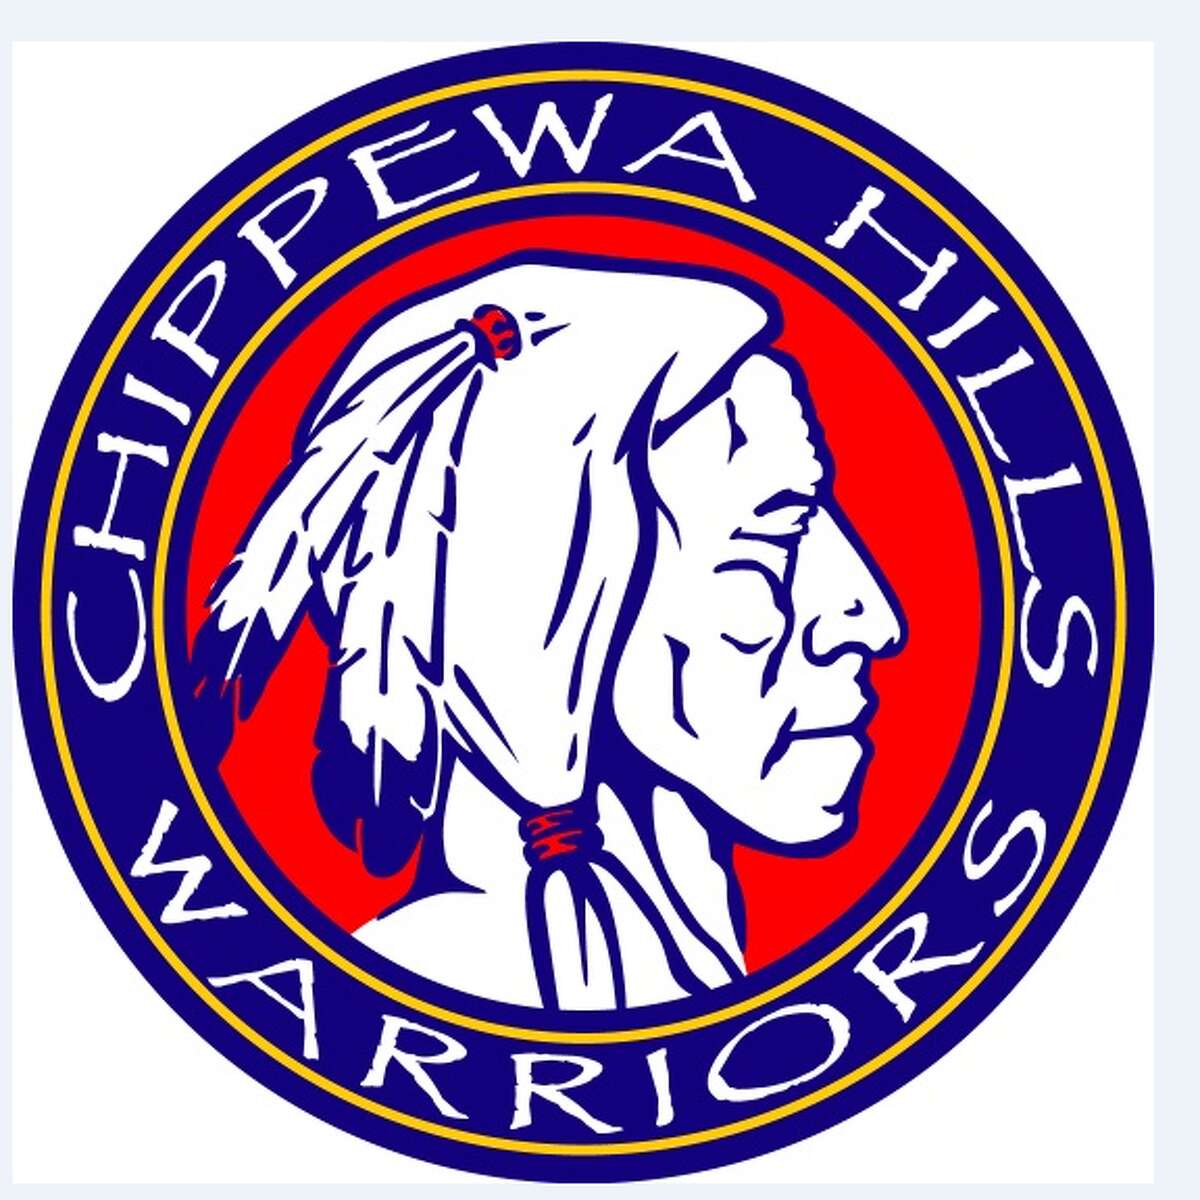 Chippewa Hills School District is continuing its plans to replace the district's logo depicting Native American imagery.